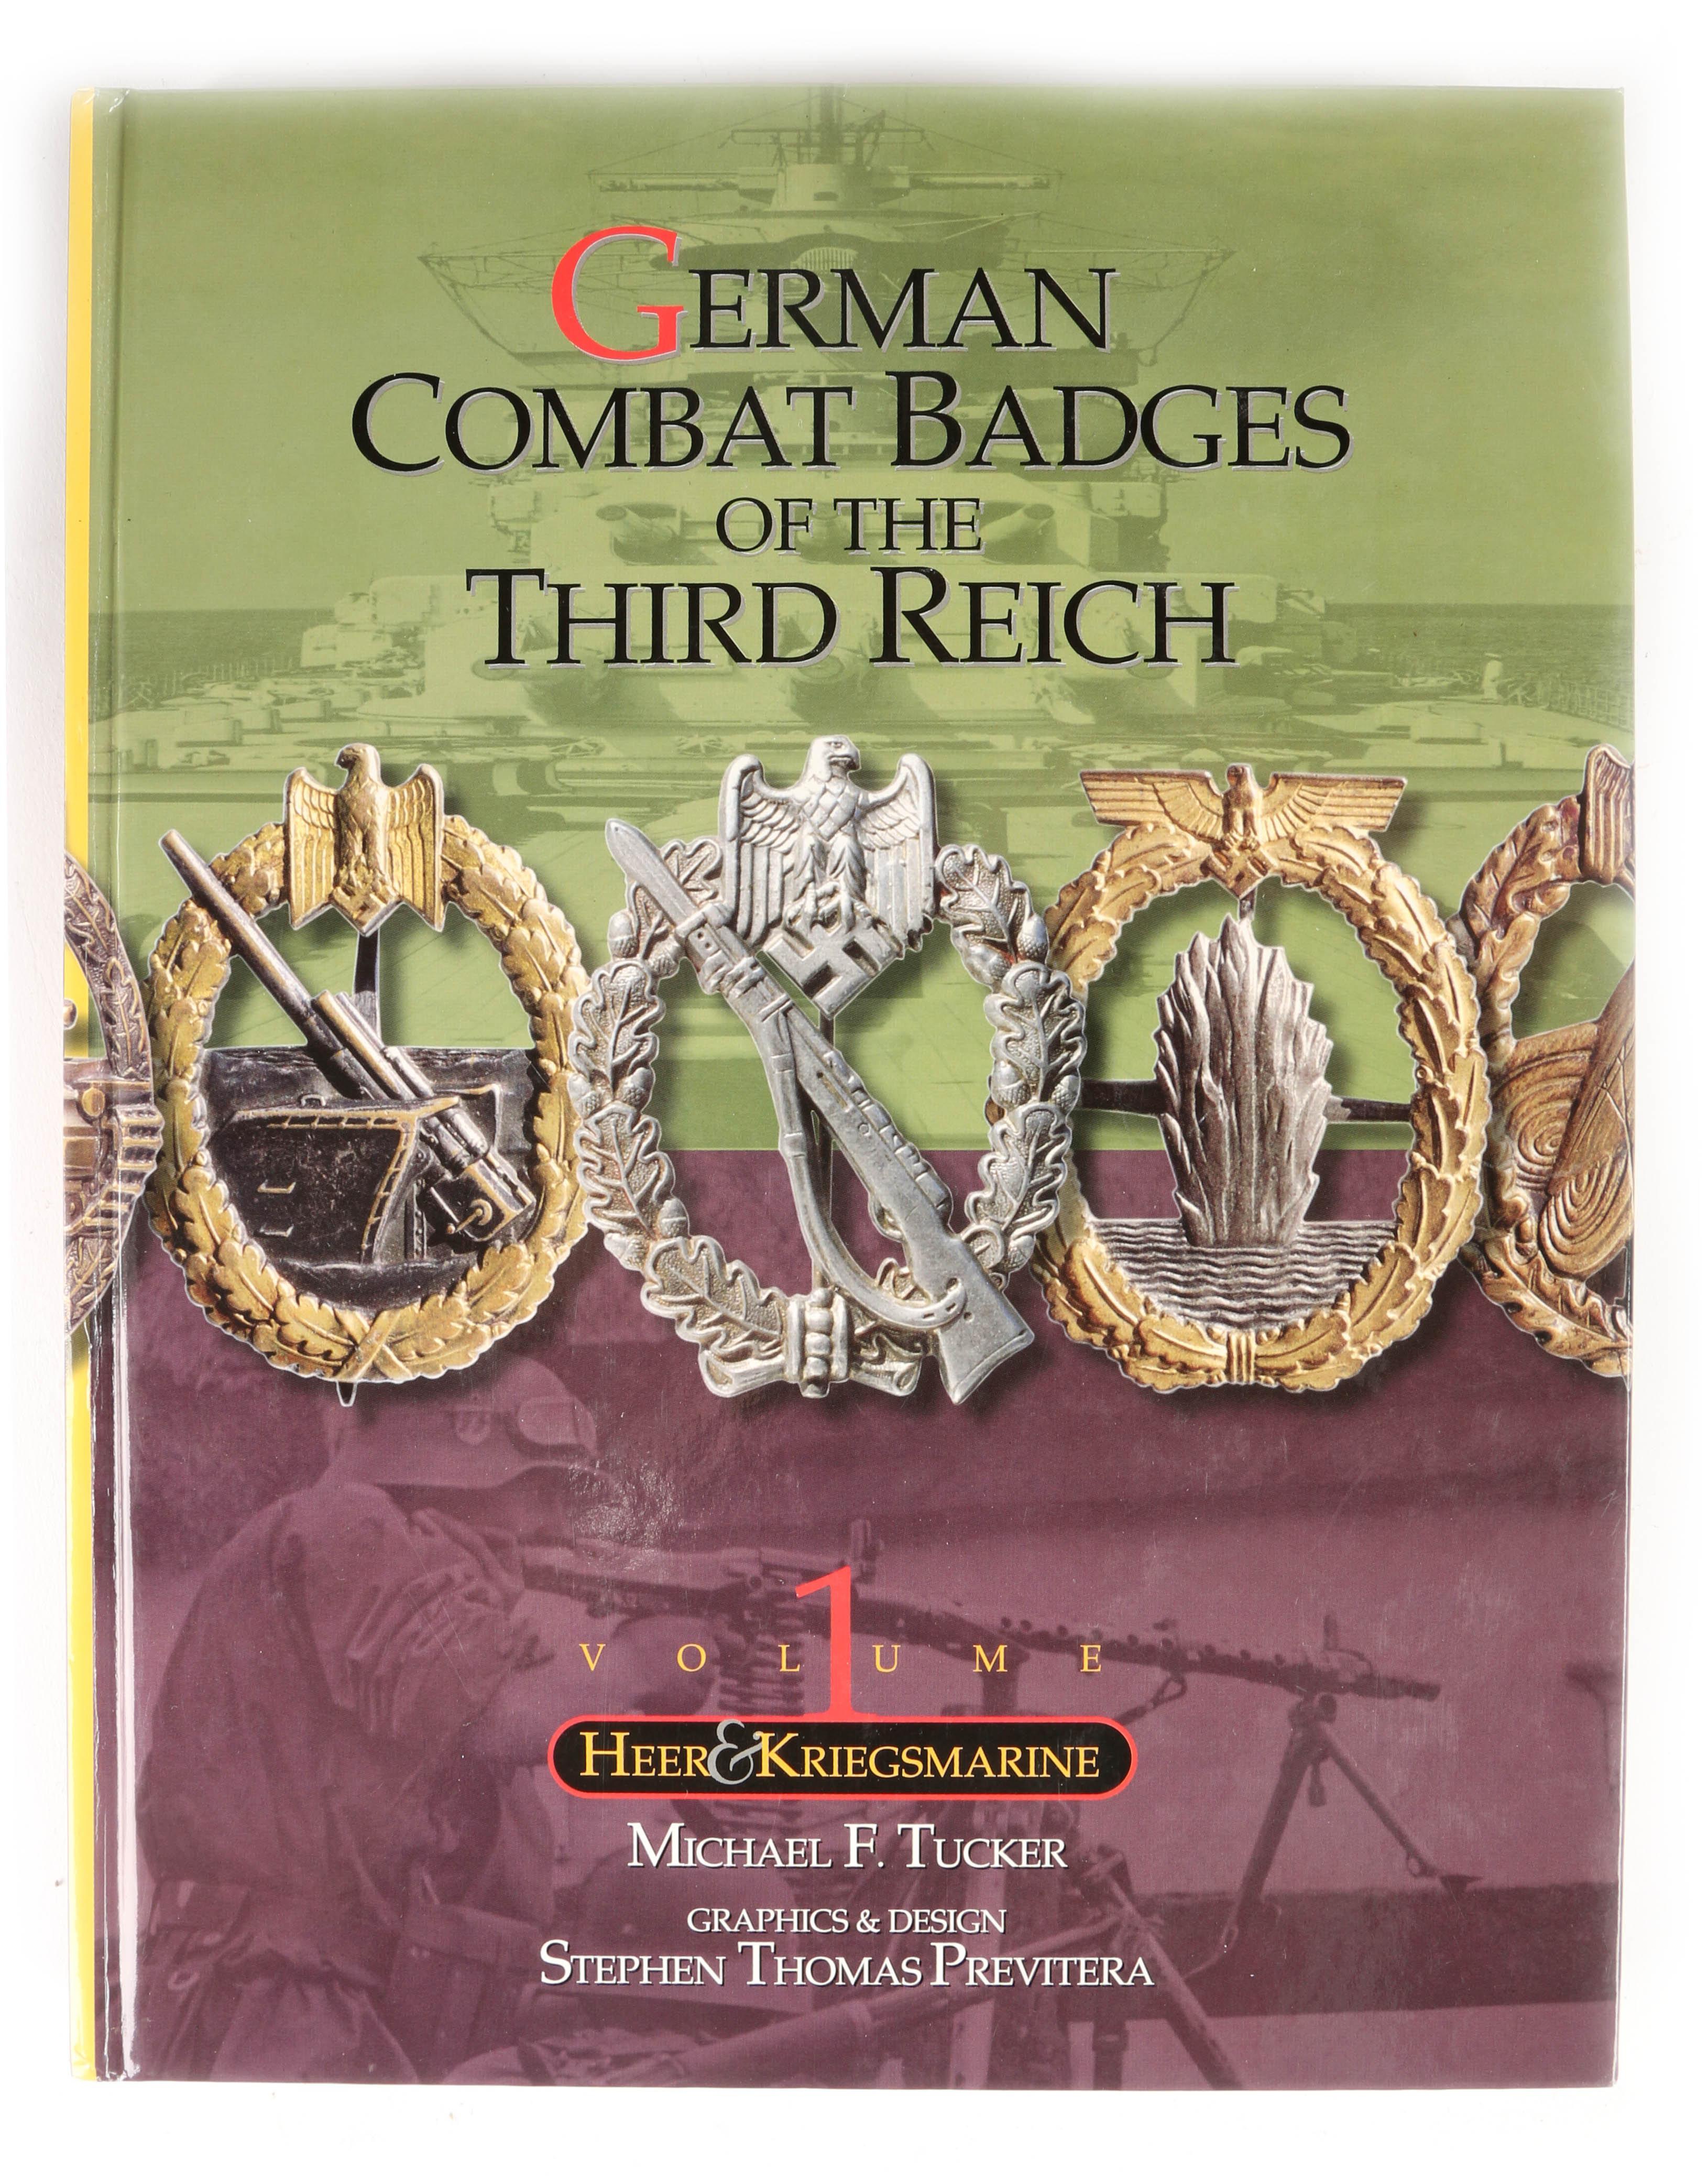 Book: German Combat Badges of the Third Reich, Volume I